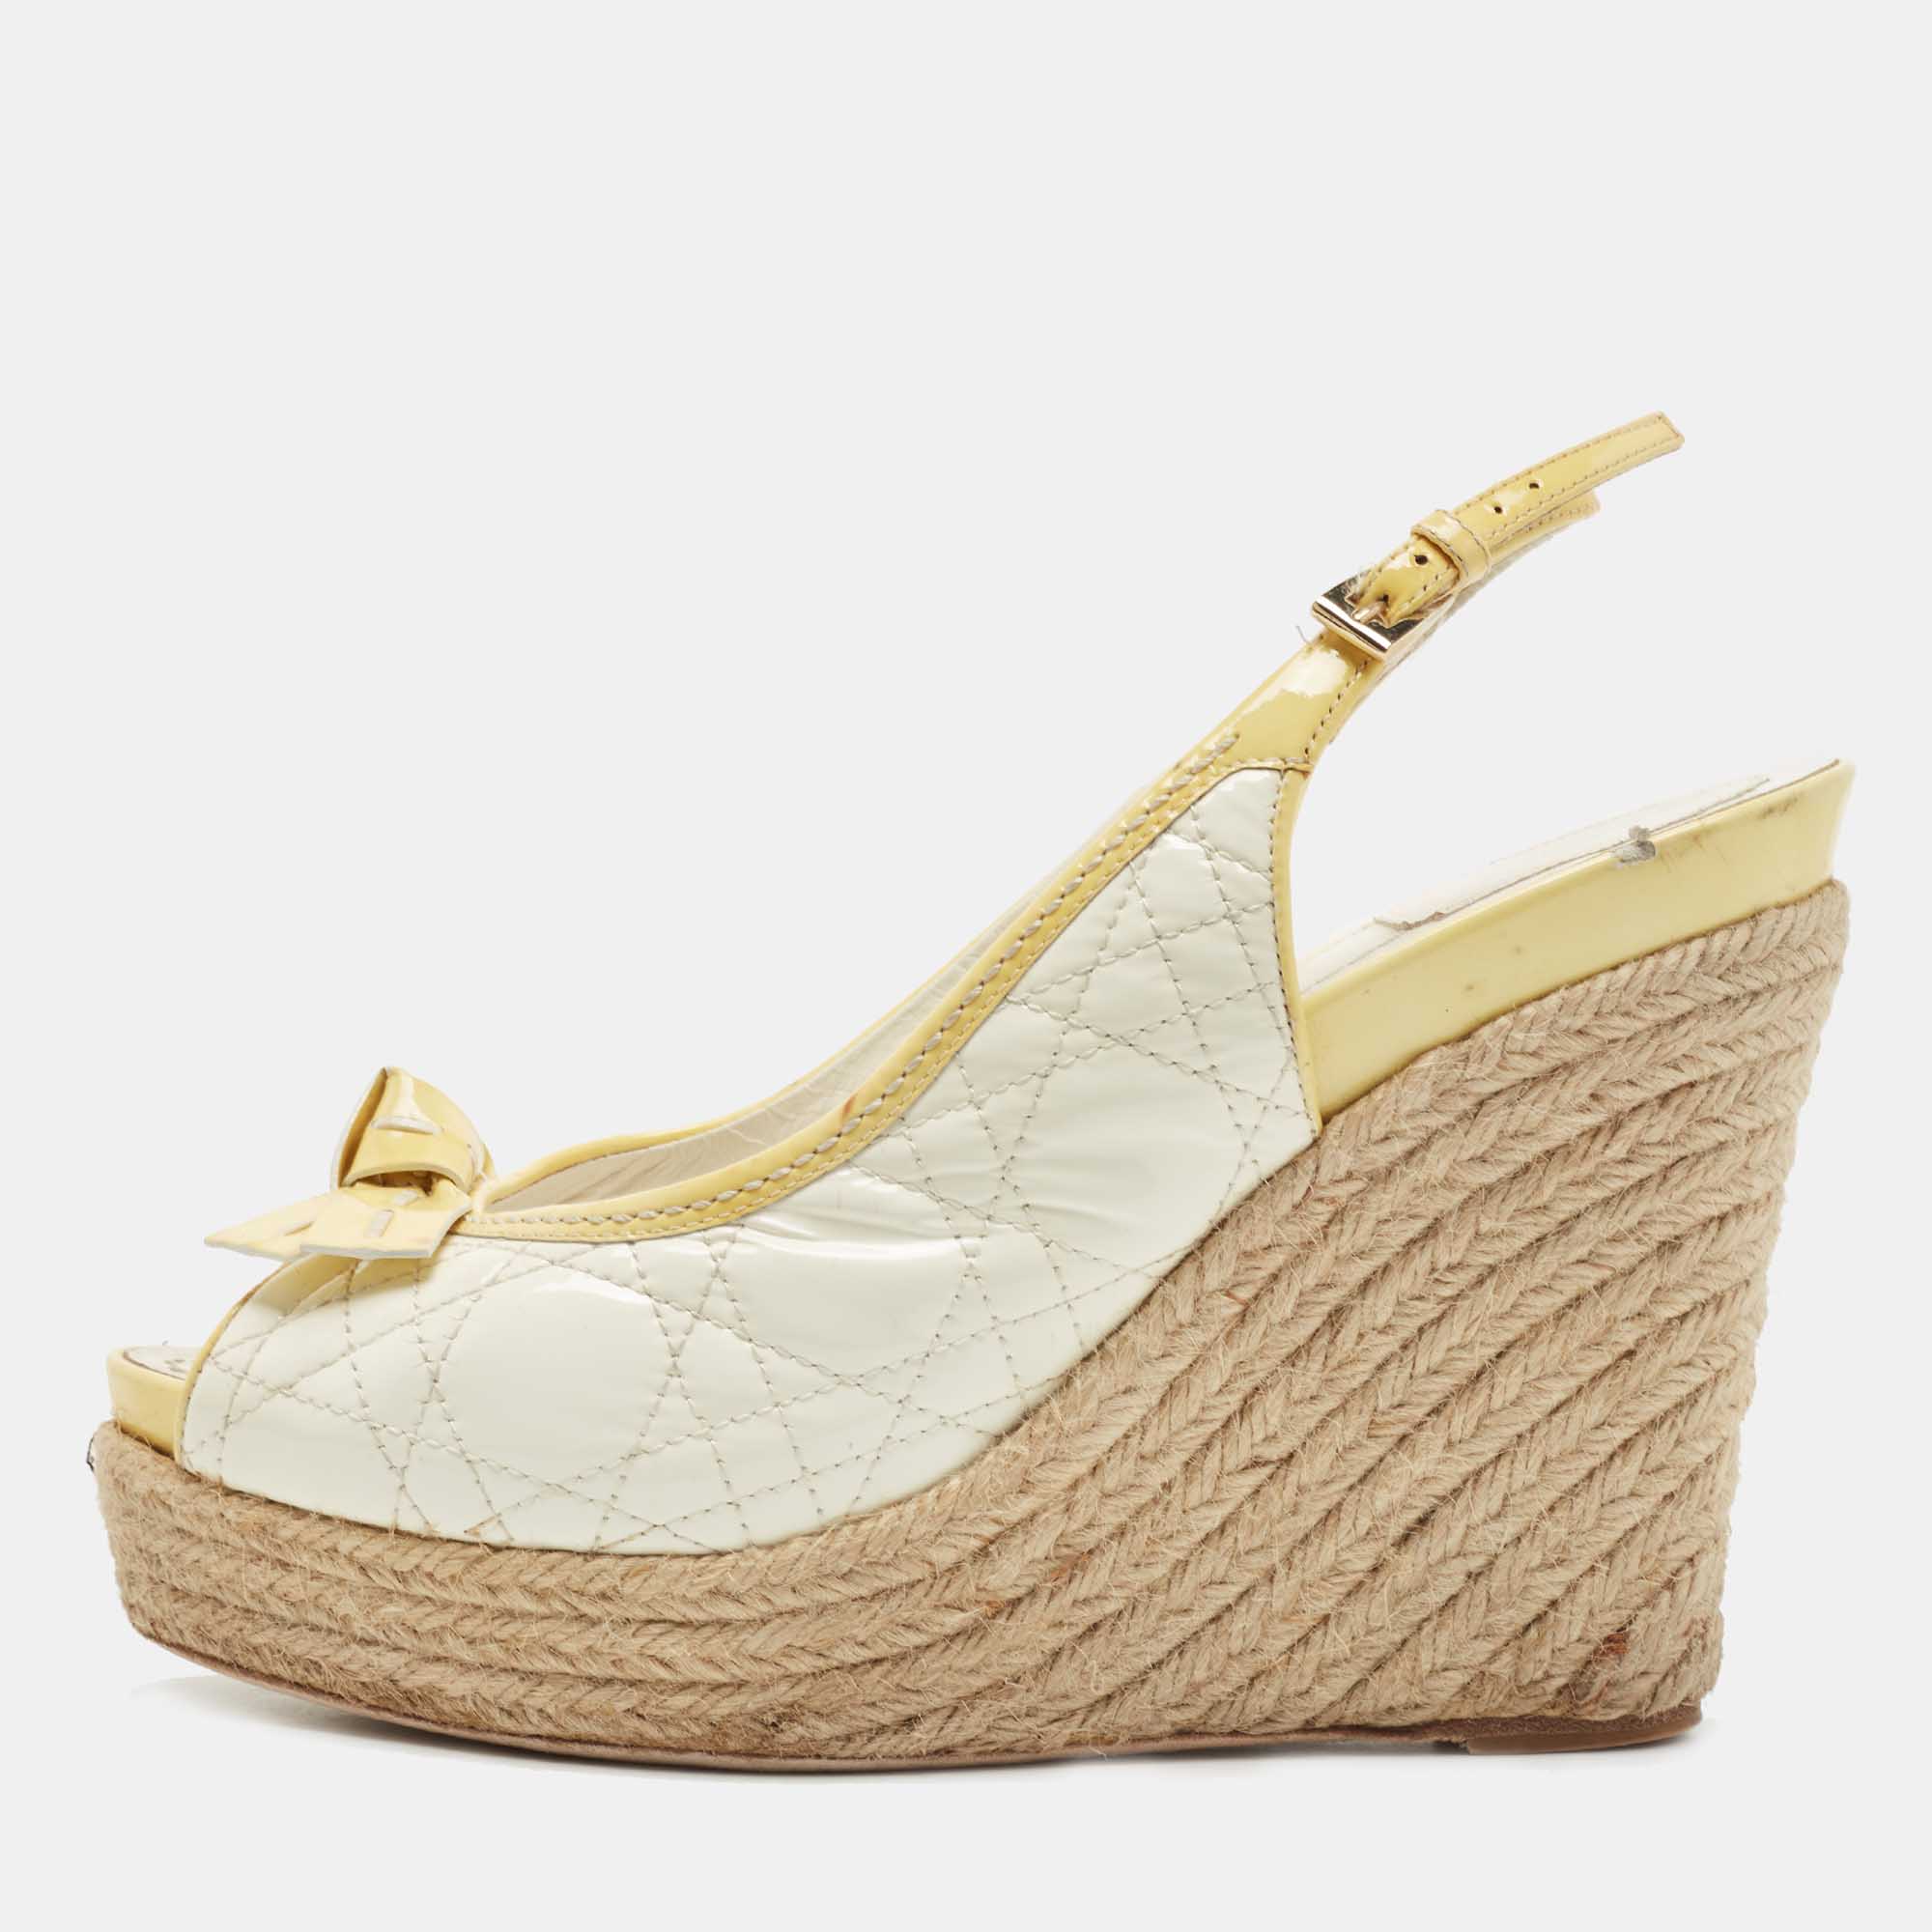 These Dior wedge shoes are meant to last you season after season. They have a comfortable fit and high quality finish.